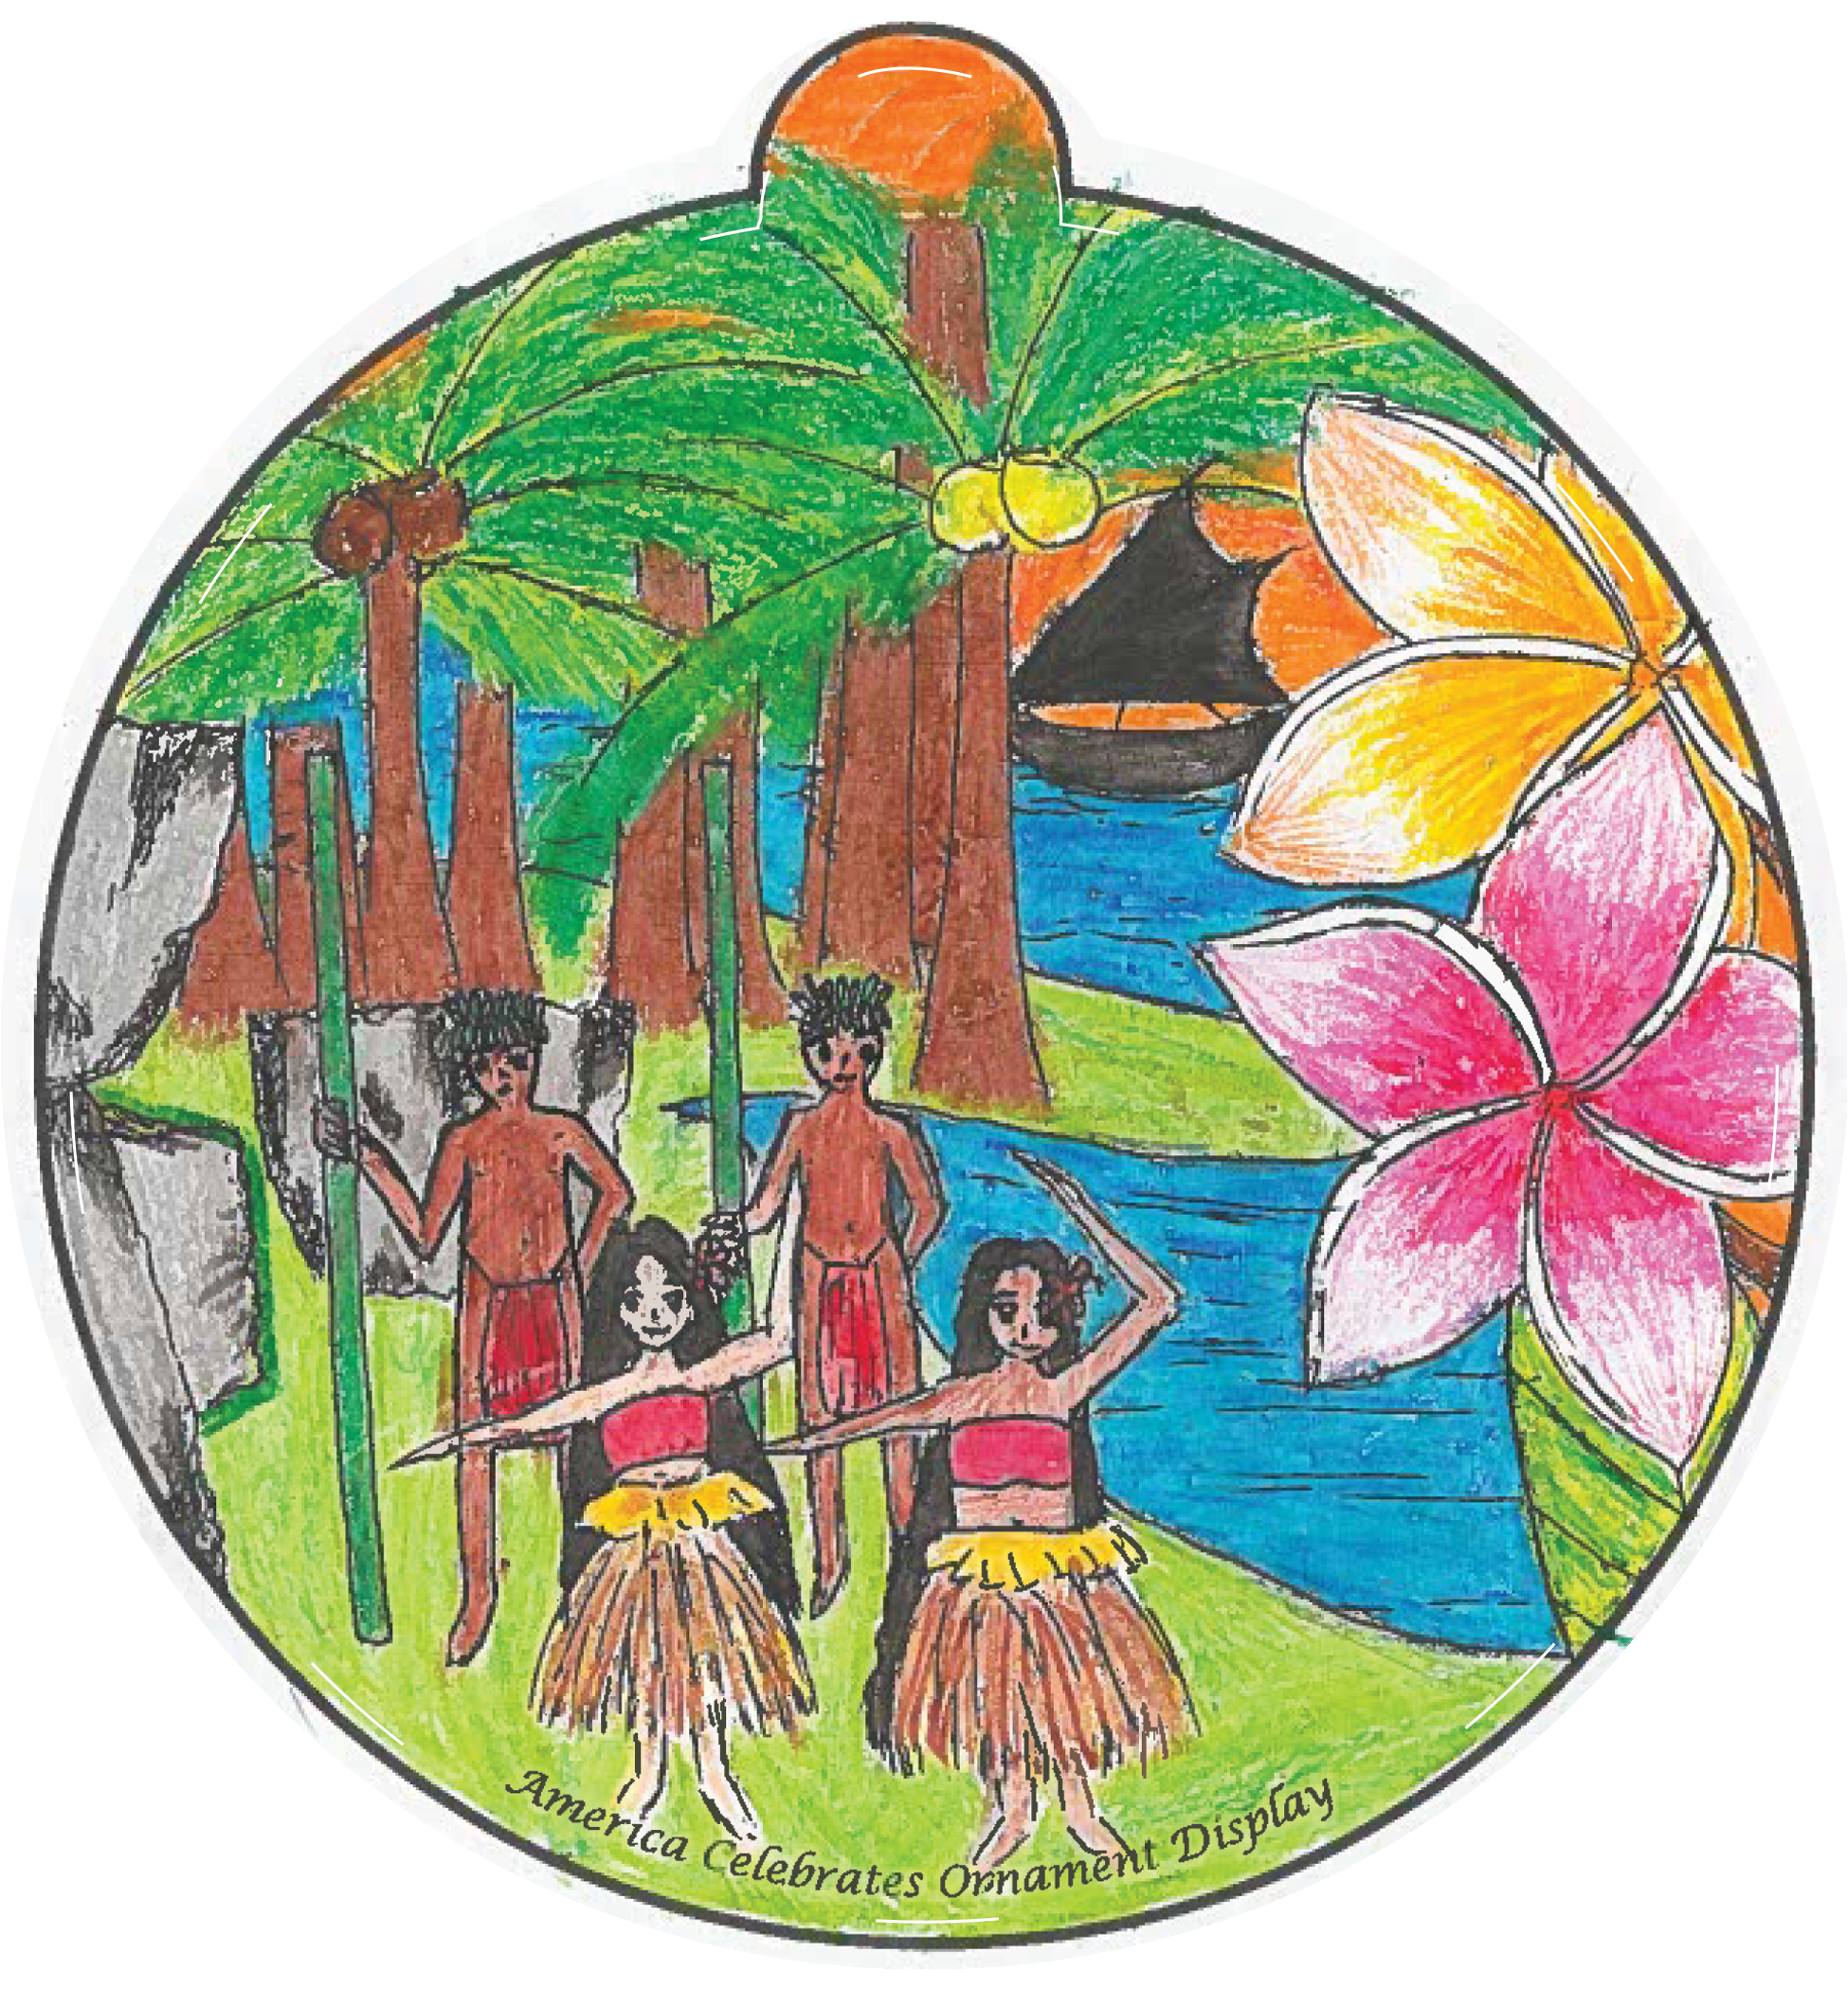 Ornament depicting people dancing in a tropical climate